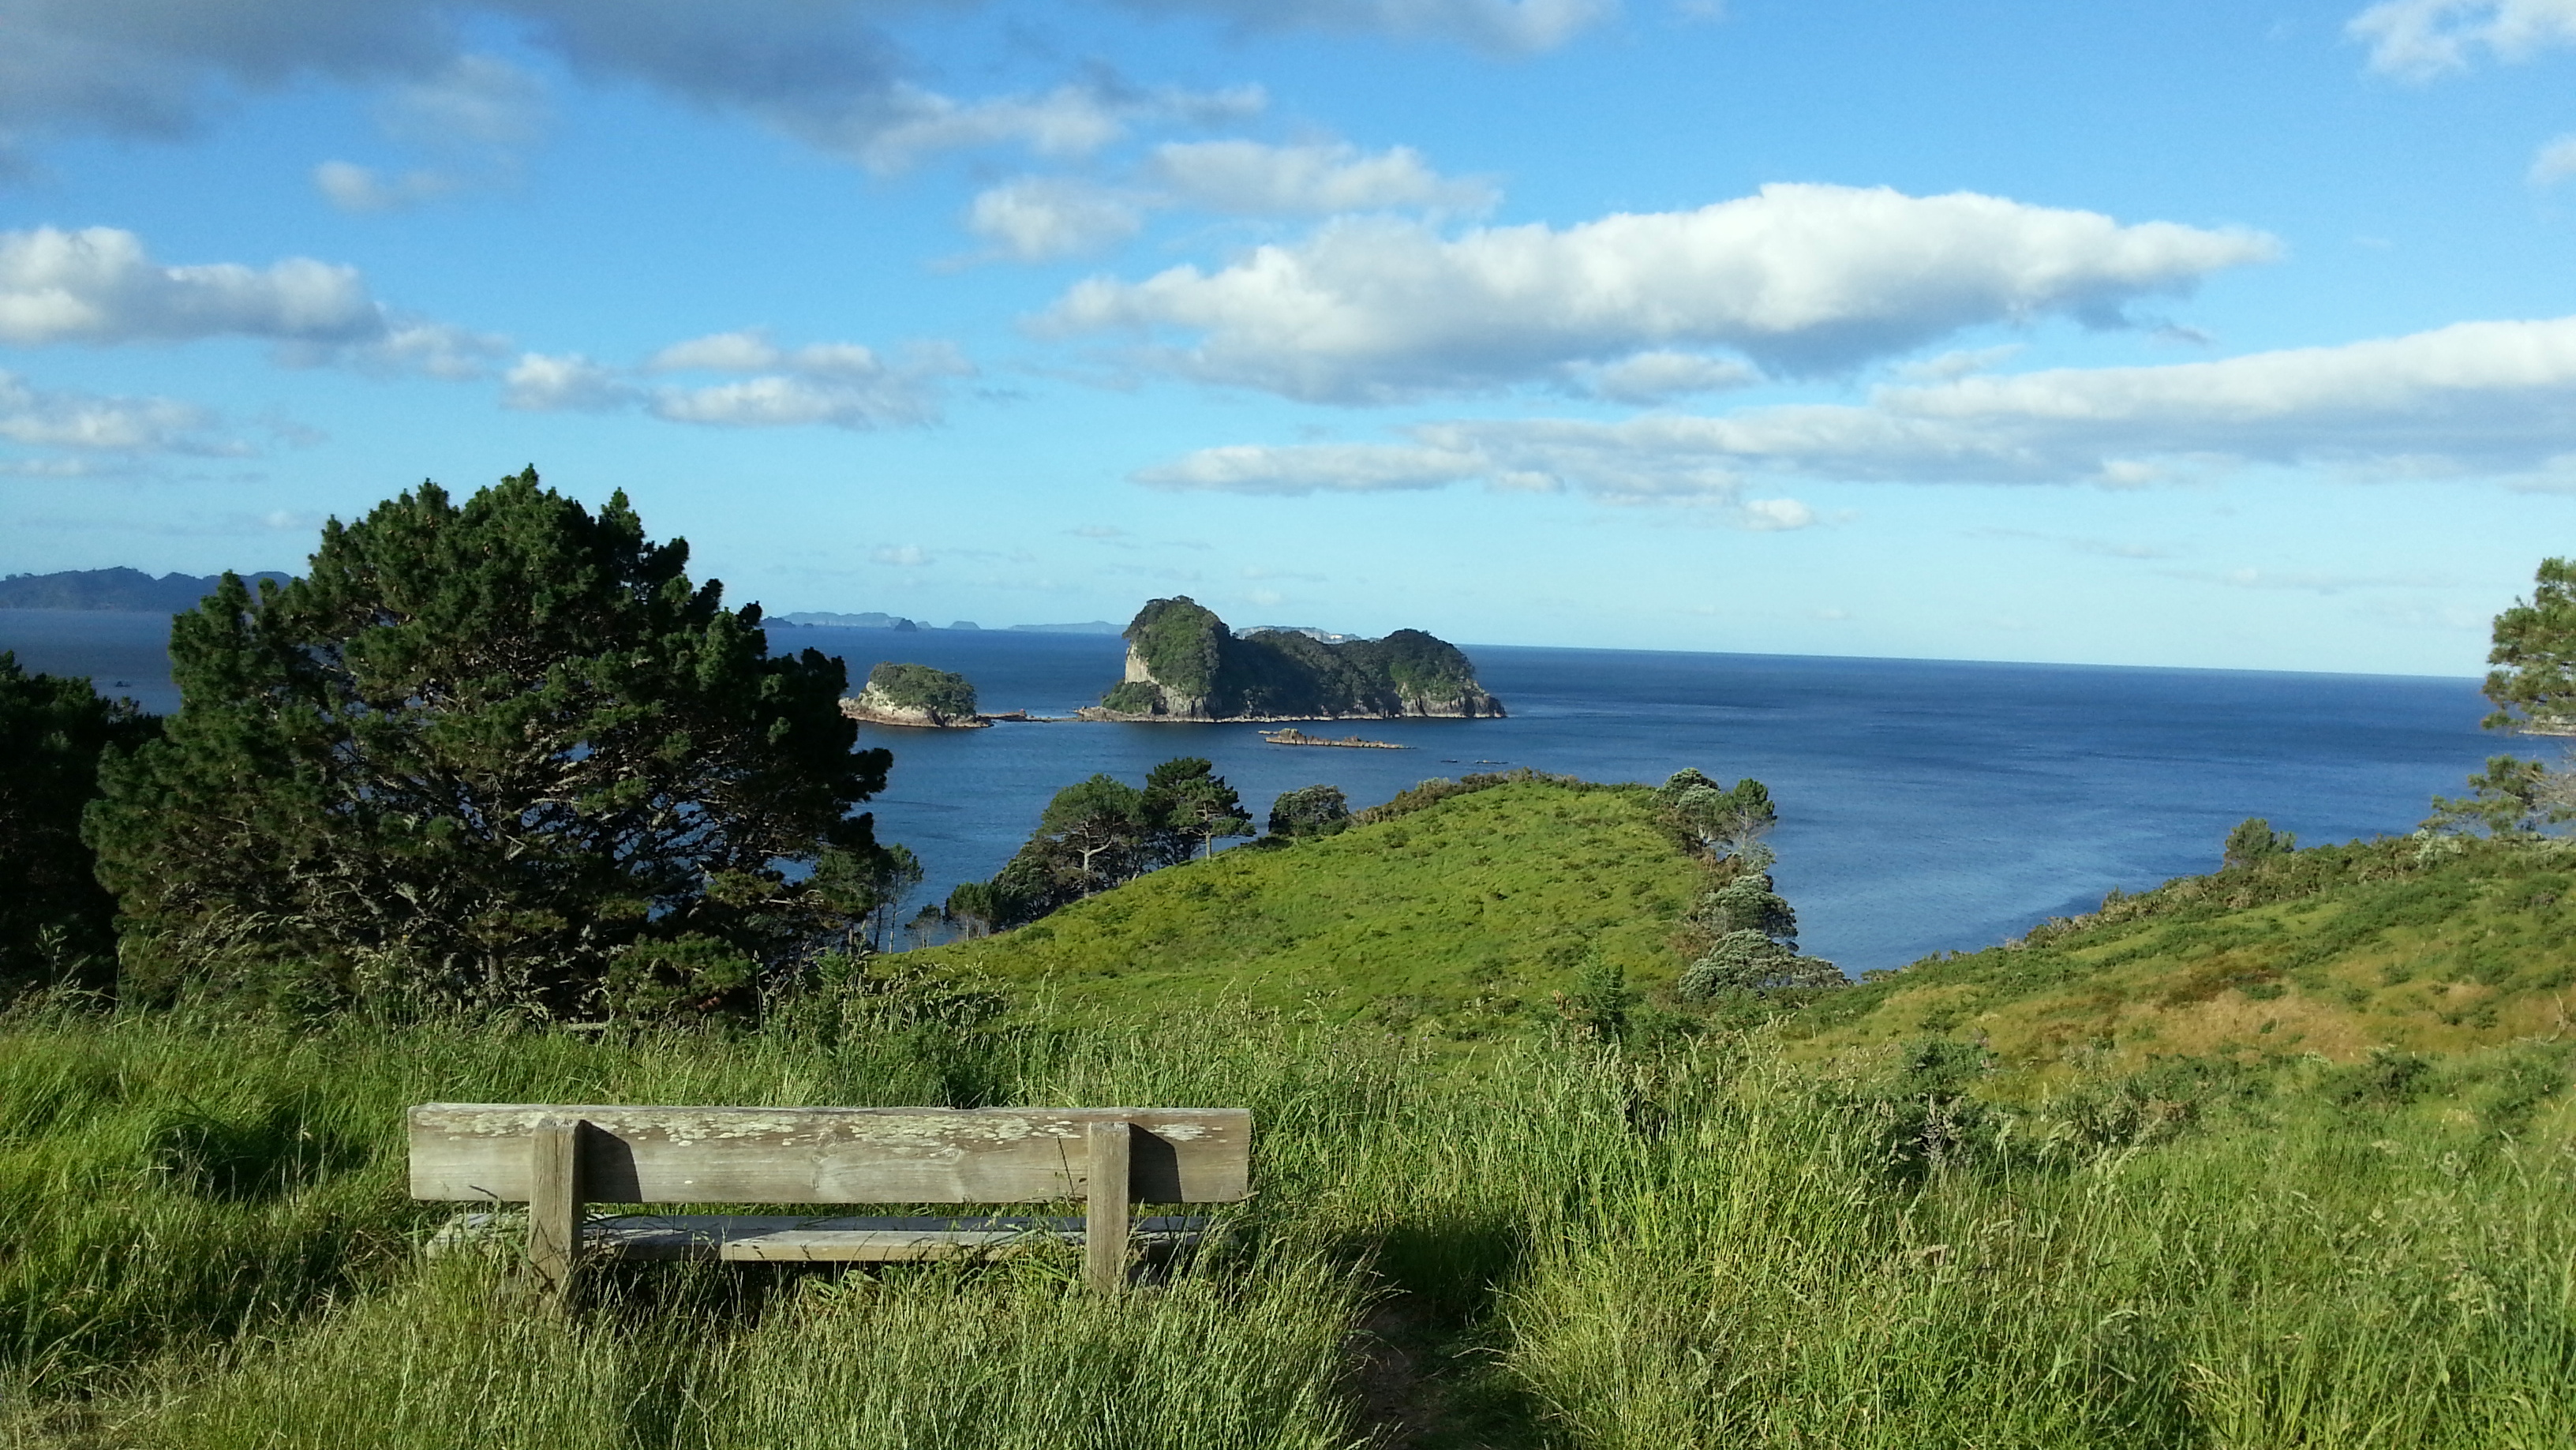 view-along-bluffs-on-hike-to-cathedral-cove-cormandel-penninsula-n-island-new-zealand